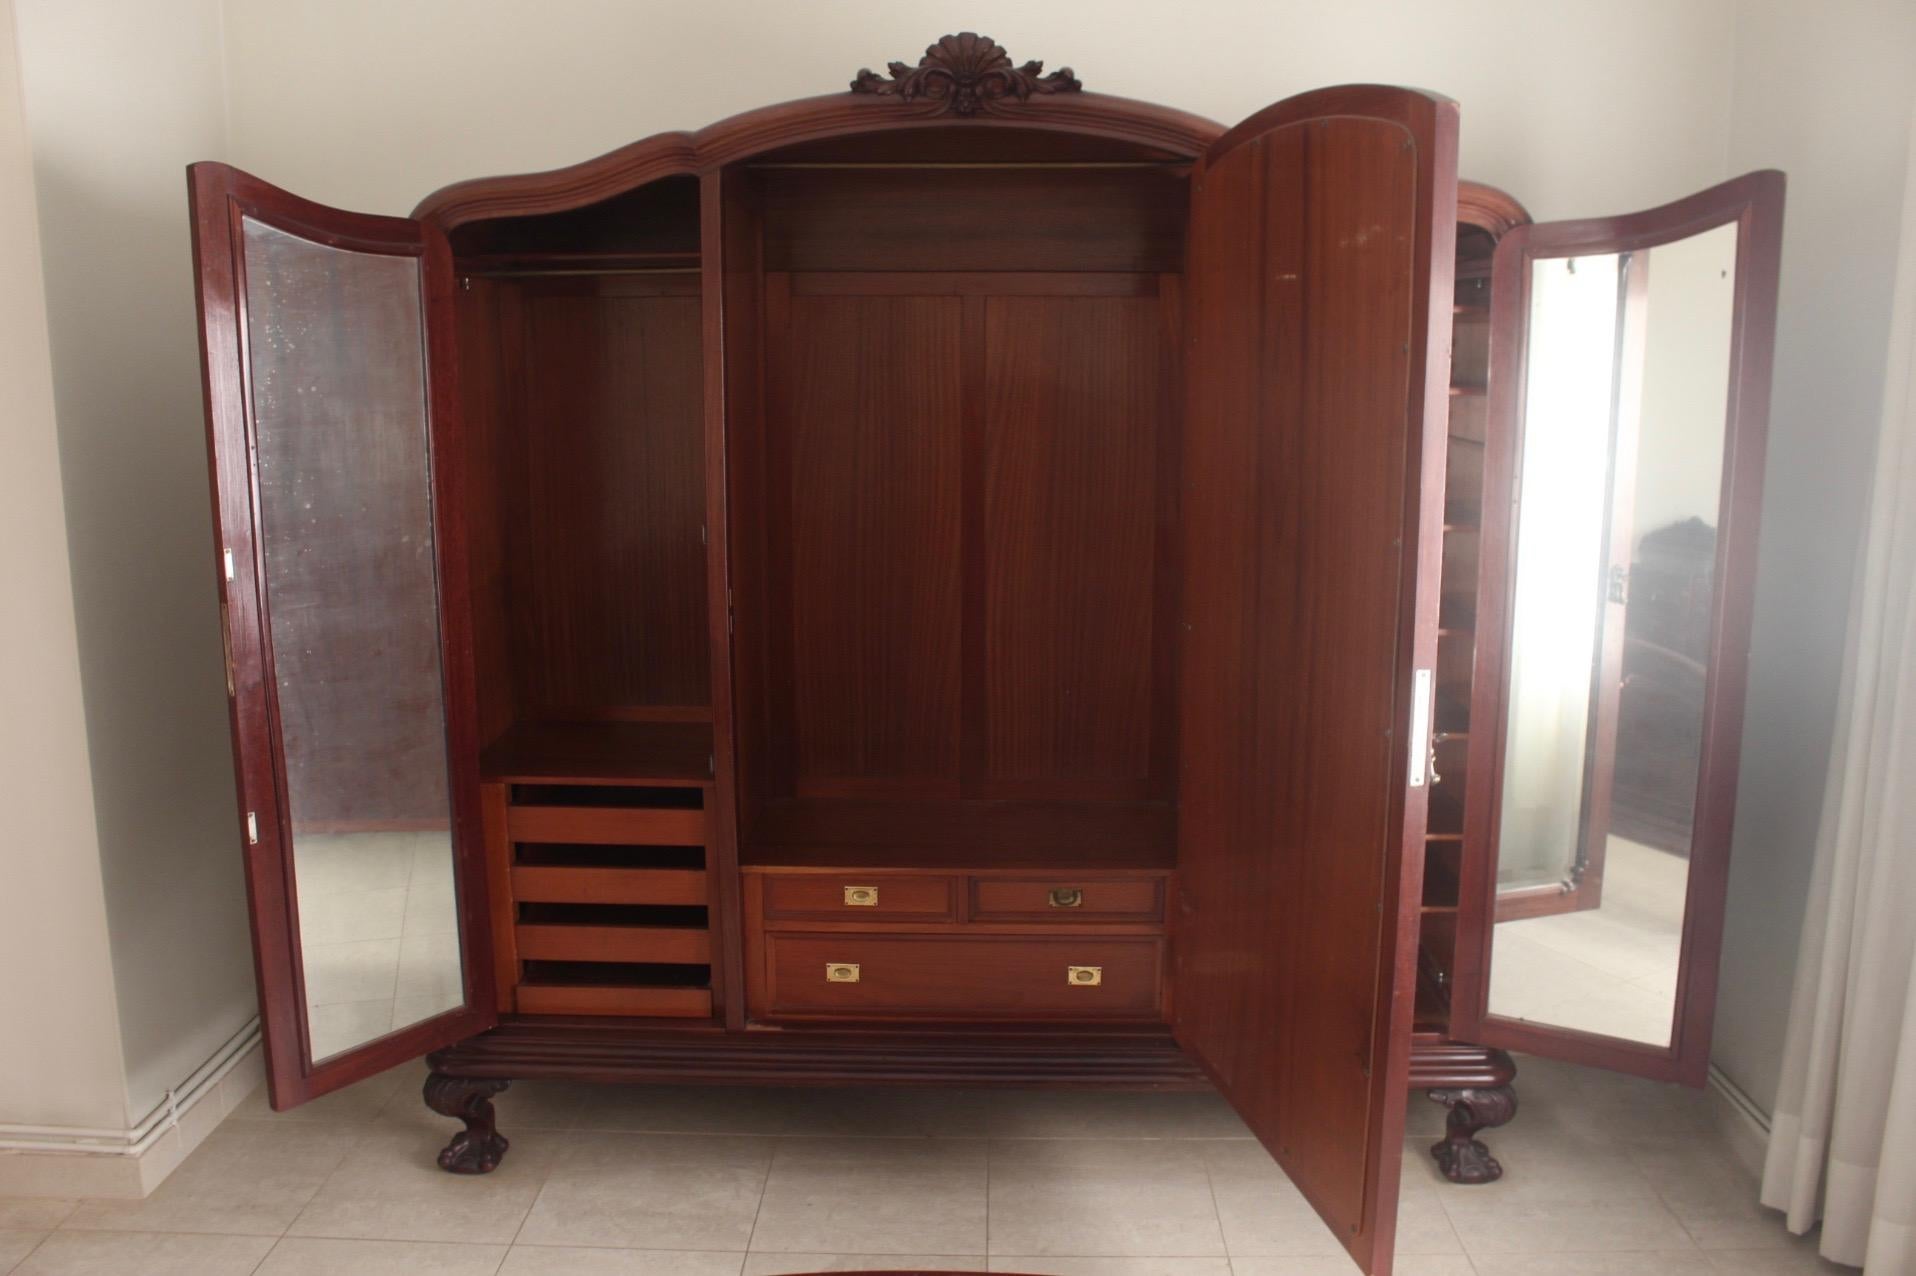 Chippendale Ball & Claw Mahogany Wood Armoire or Wardrobe with 3 Vanity Mirrors im Zustand „Hervorragend“ im Angebot in Valencia, Valencia